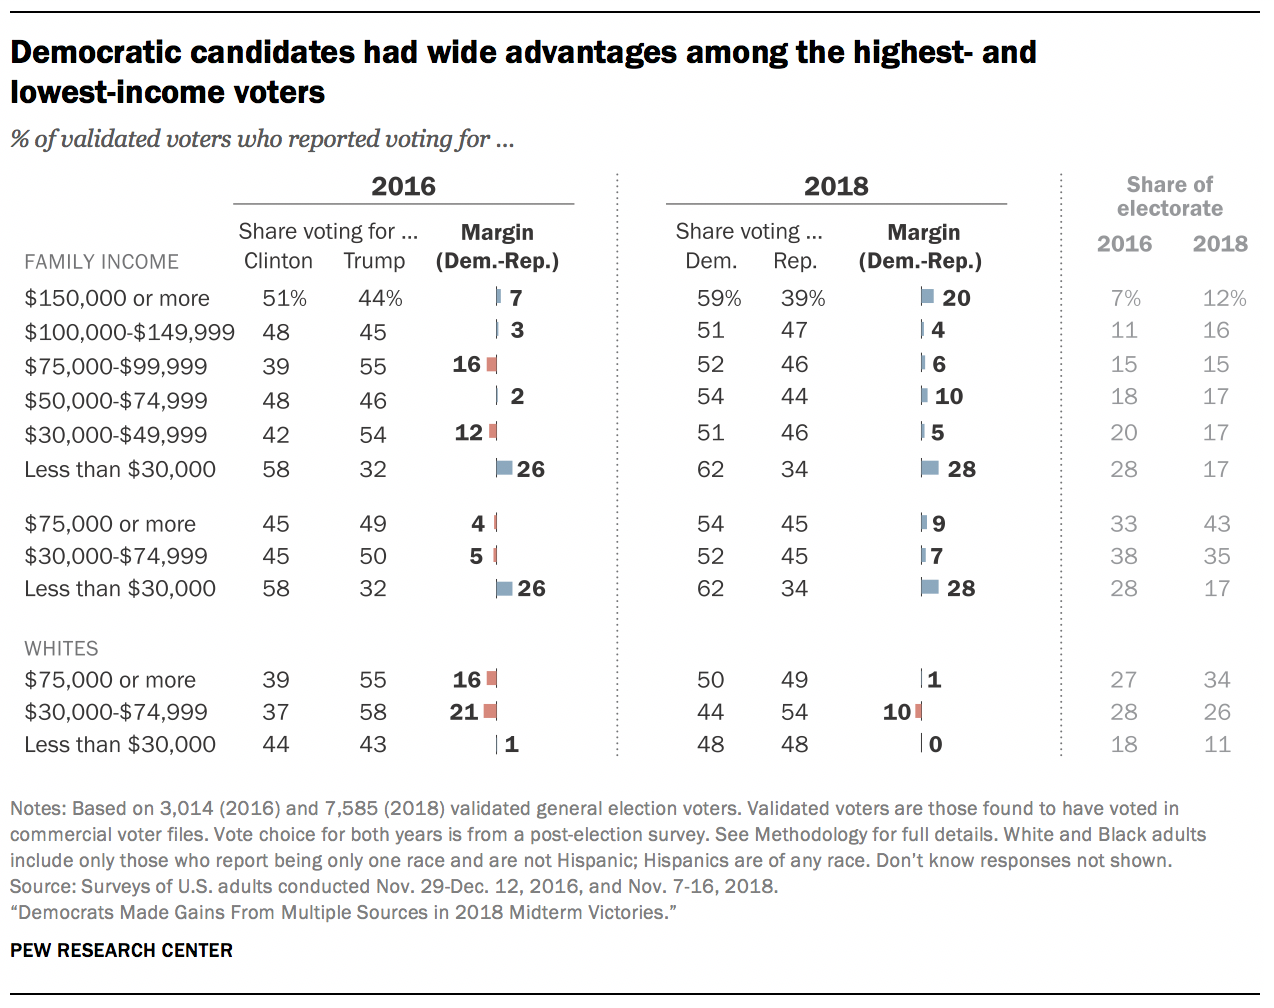 Democratic candidates had wide advantages among the highest- and lowest-income voters